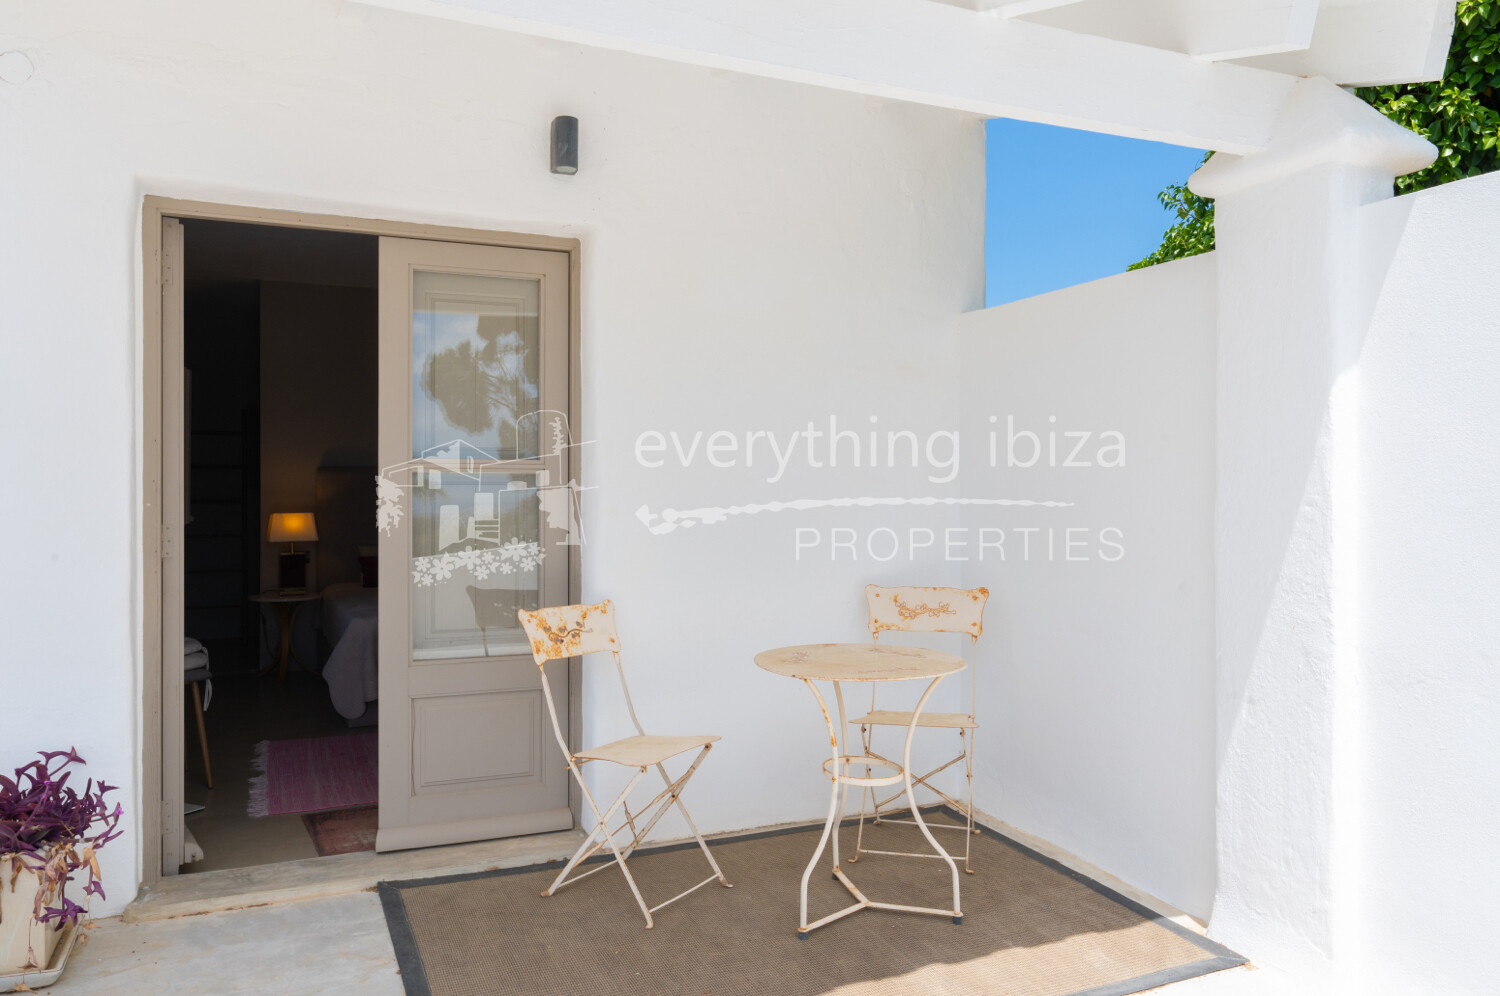 Exquisite Luxury Villa Close to Cosmopolitan San Rafael, ref. 1610, for sale in Ibiza by everything ibiza Properties